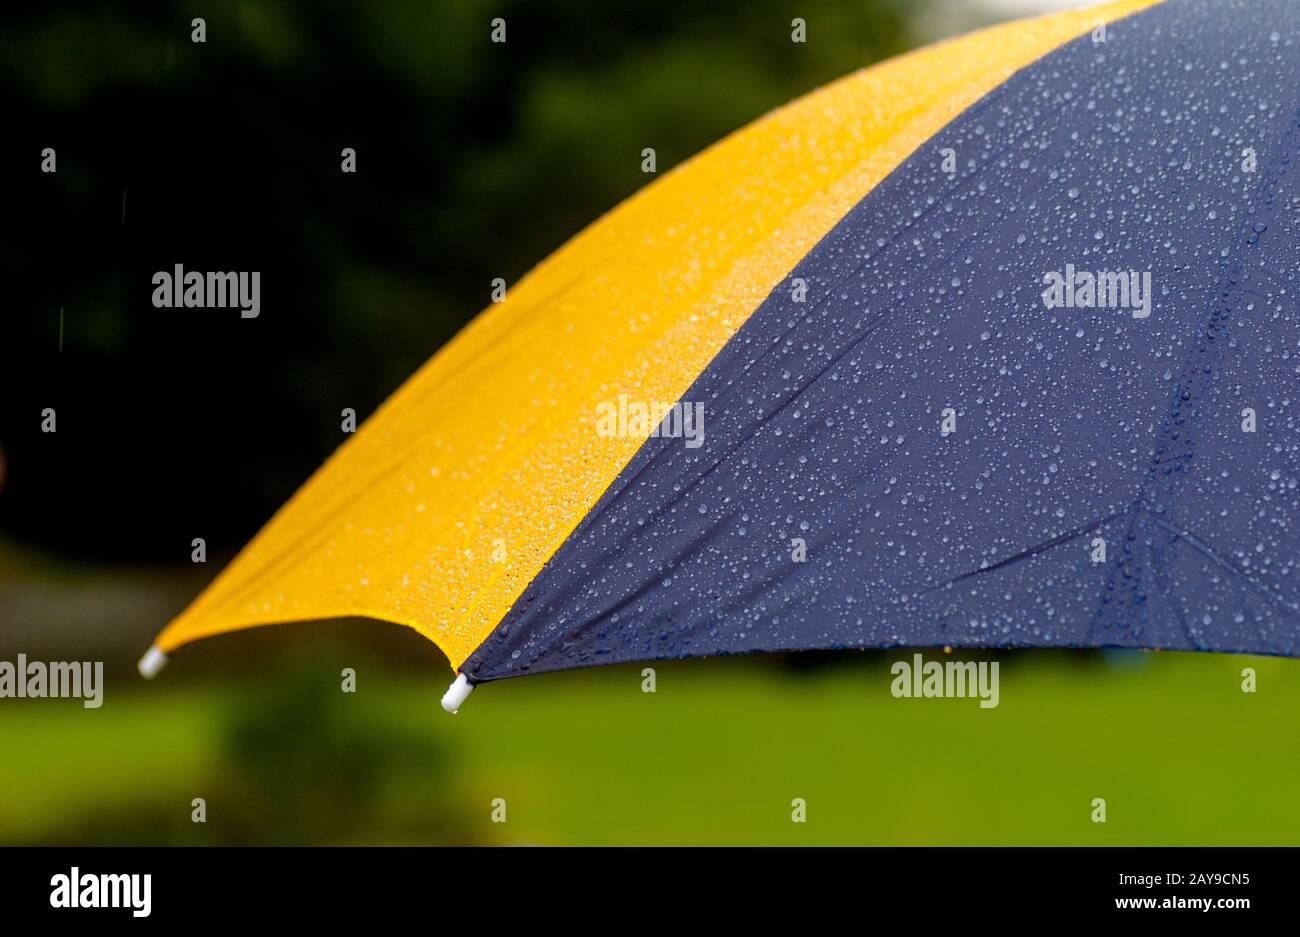 Yellow and navy blue umbrella outdoors with raindrops Stock Photo